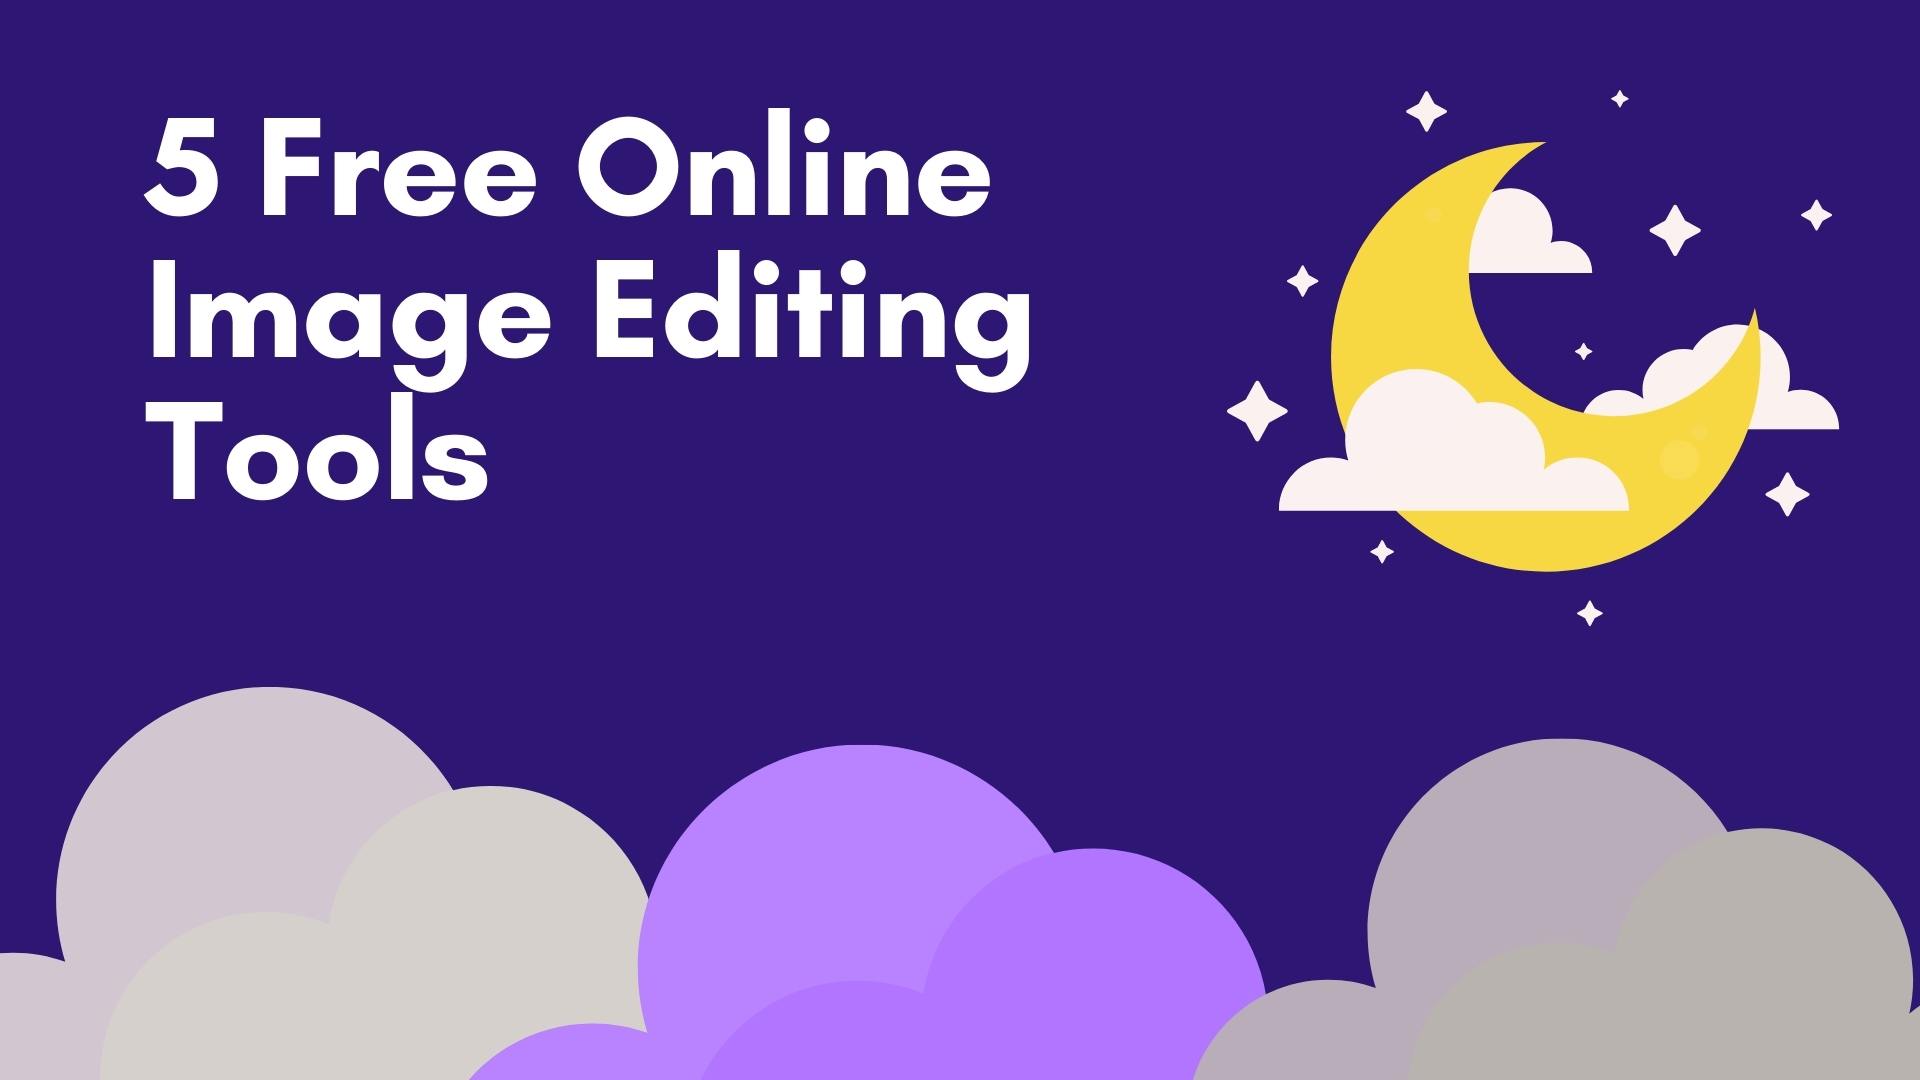 5 Free Online Image Editing Tools to Help You Create Stunning Visuals